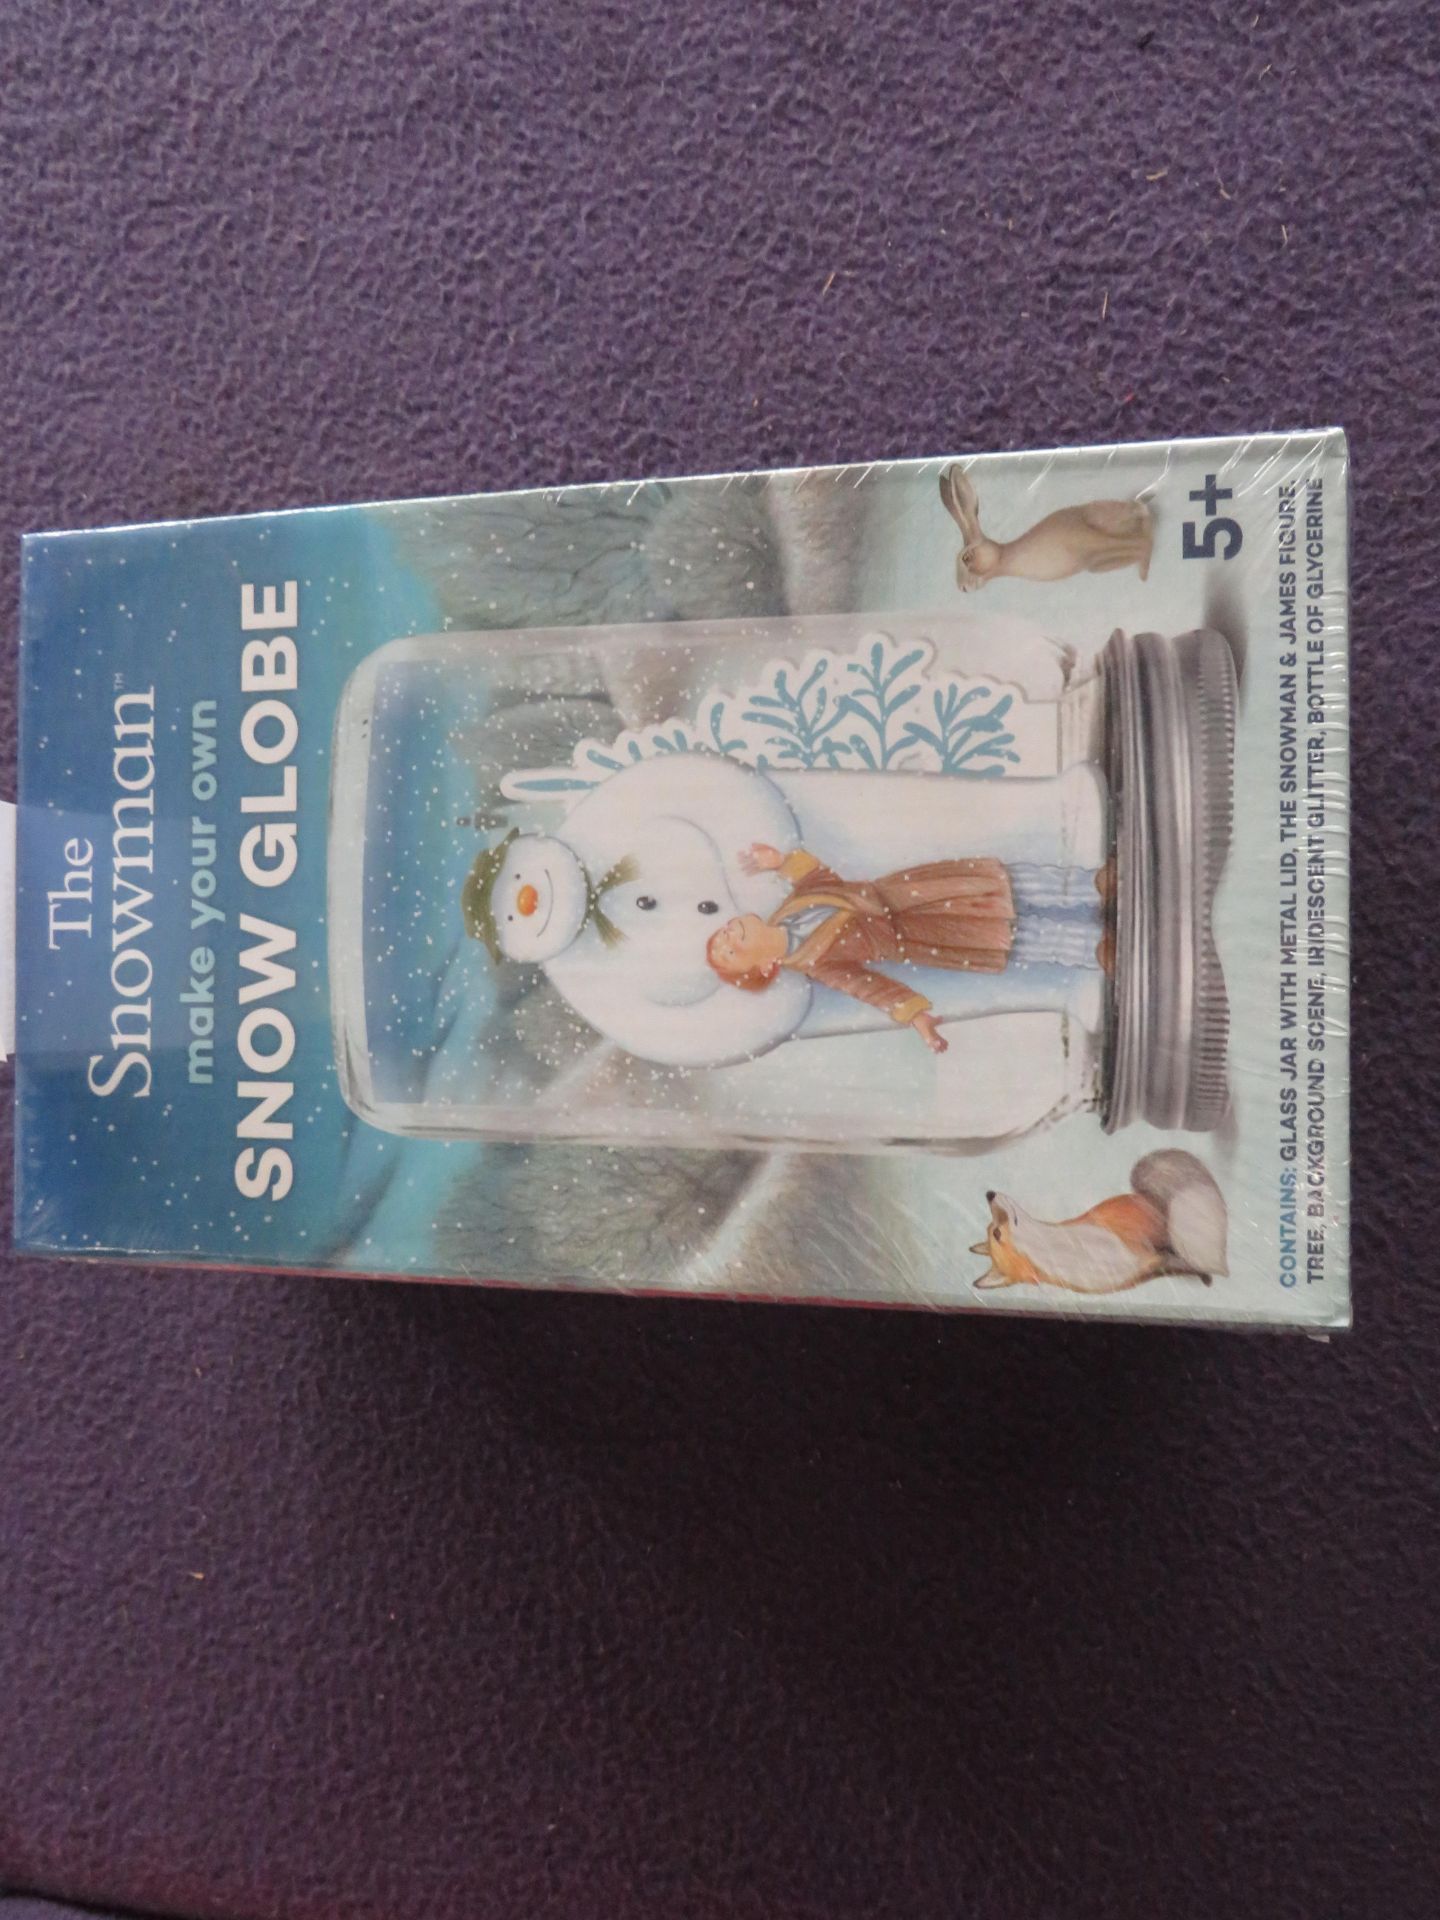 10x The Snowman - Make Your Own Snowglobe - New & Boxed.